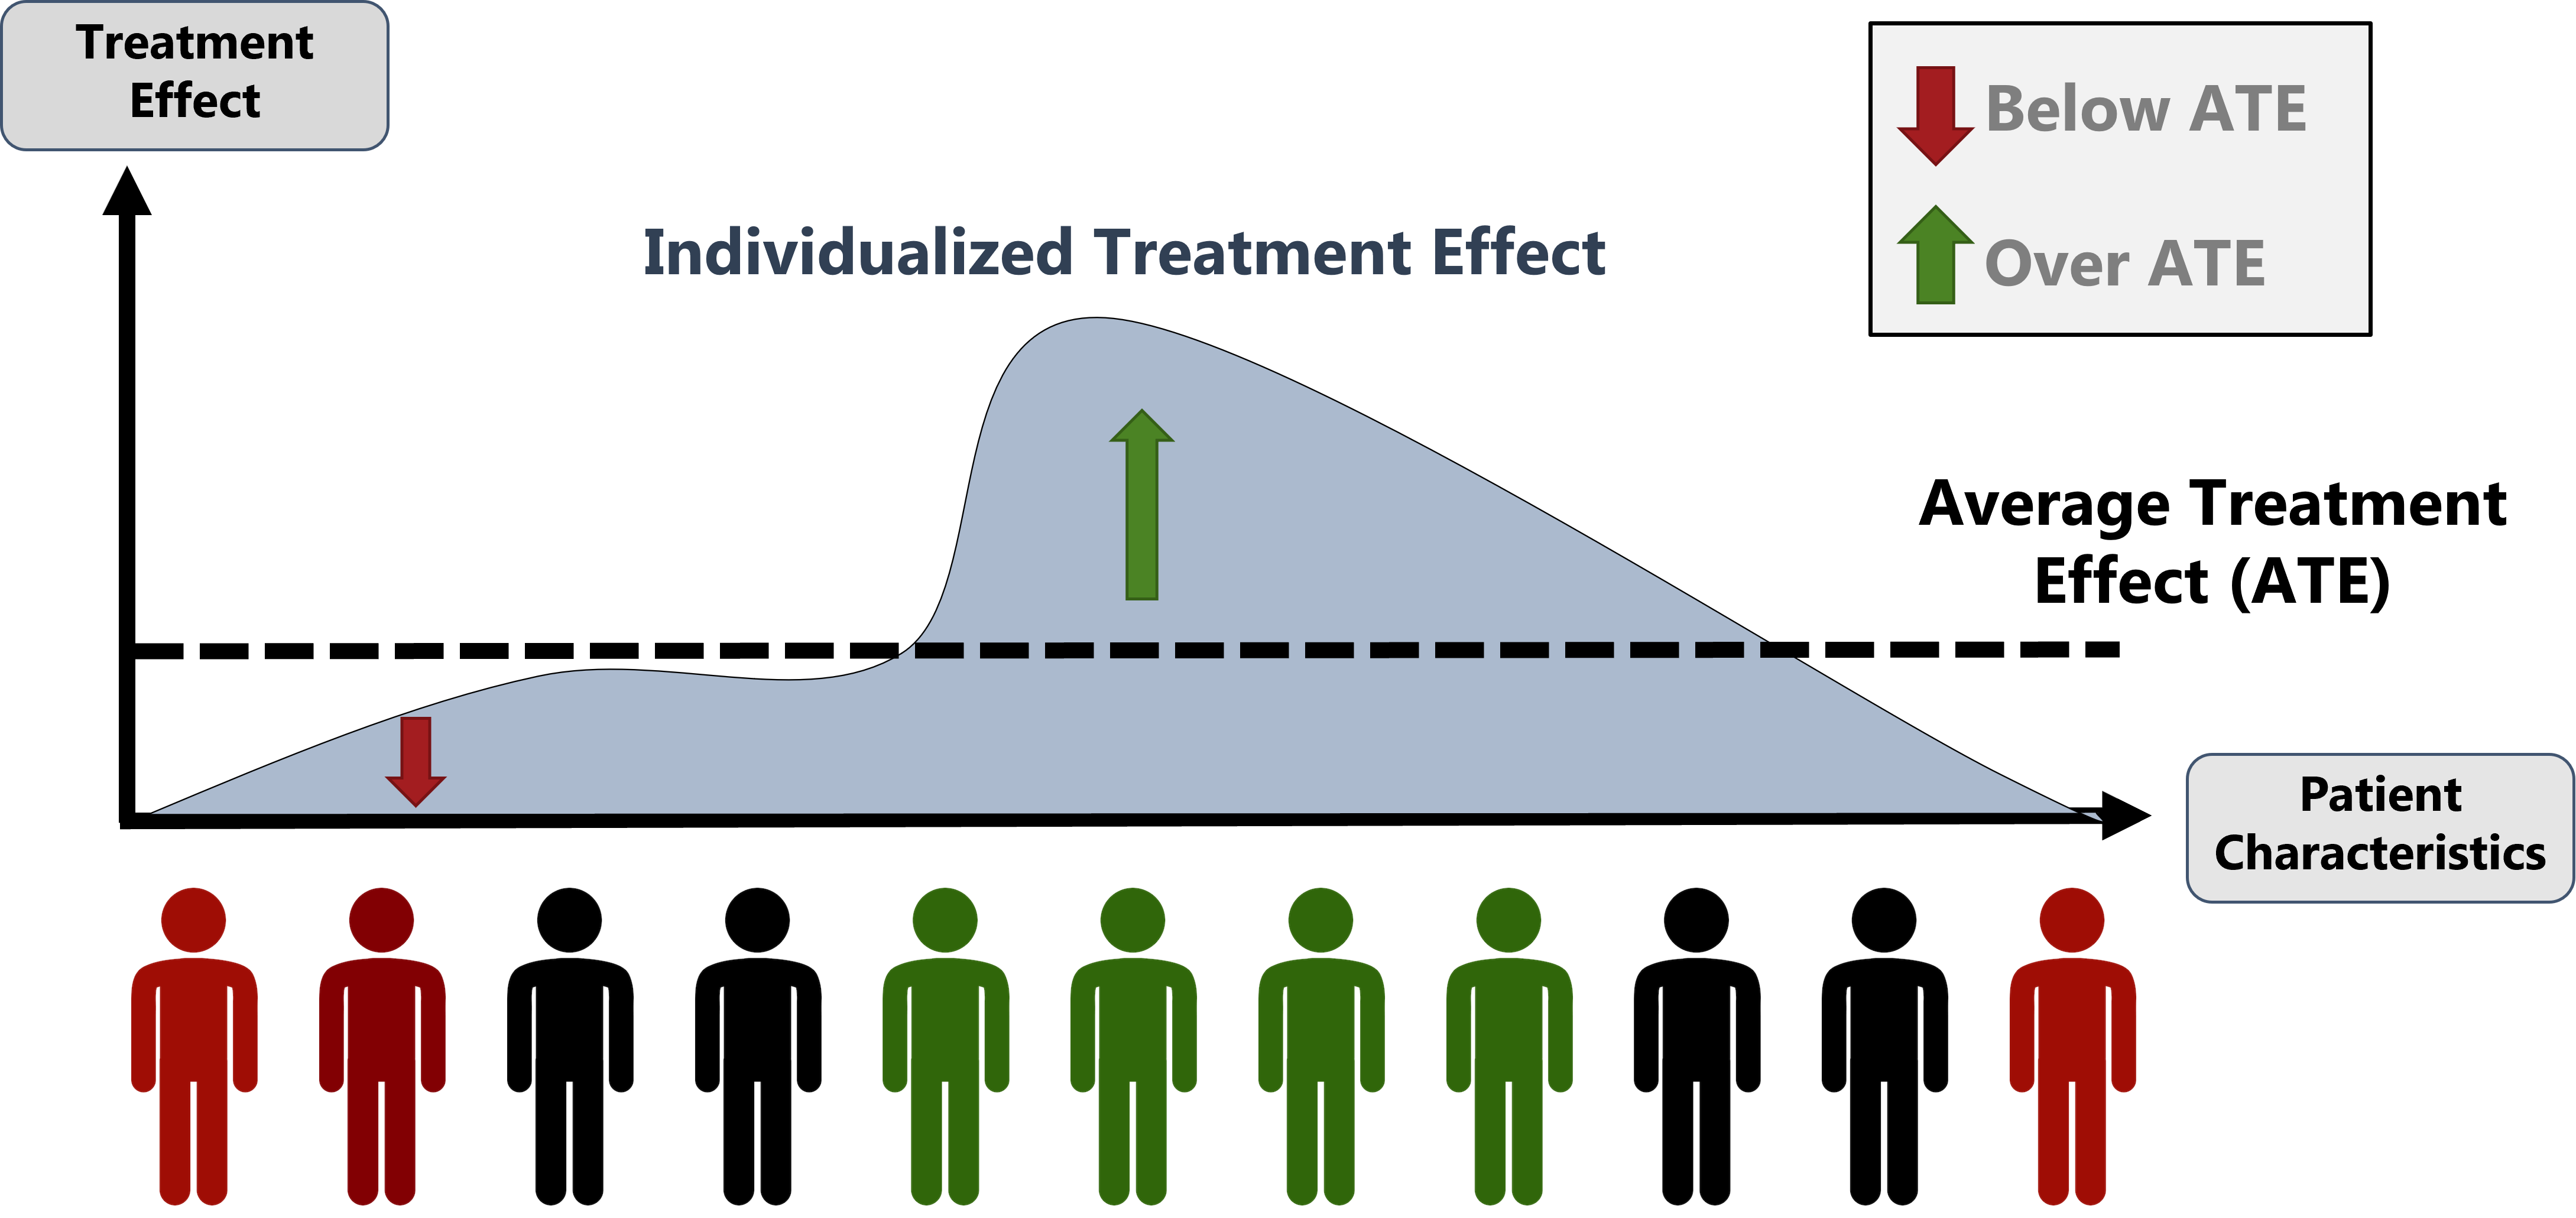 Figure explaining the importance of estimating individualized treatment effects when providing precision medicine recommendations rather than average treatment effects.